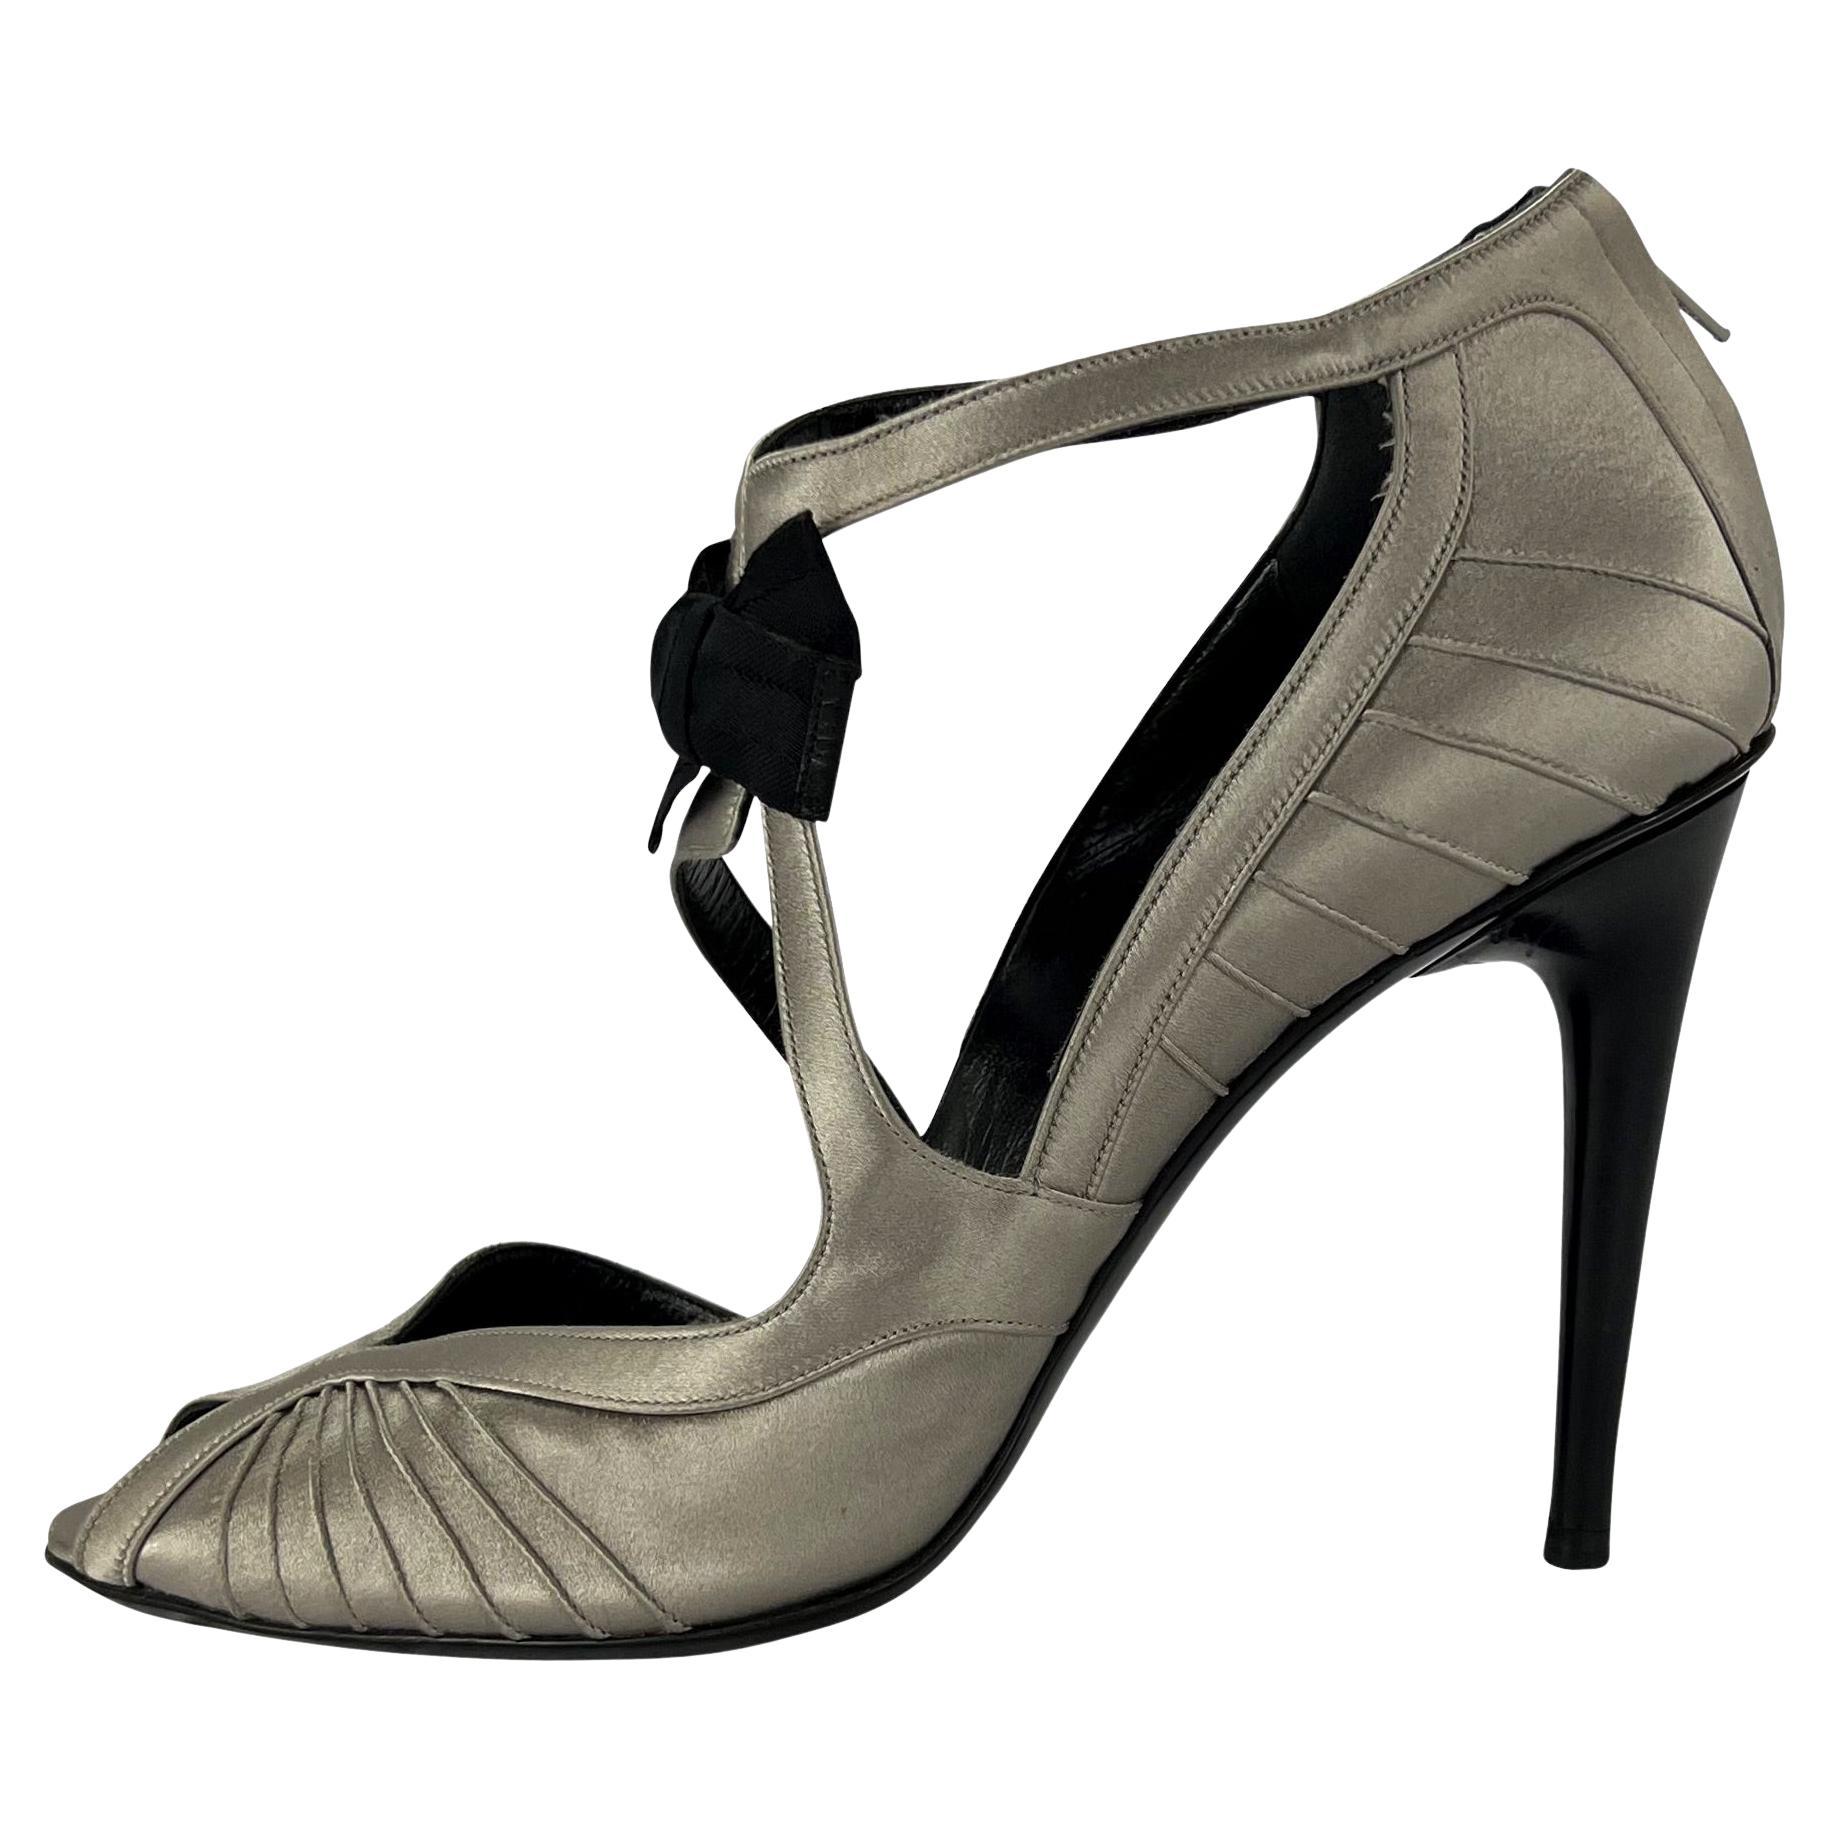 Black S/S 2004 Gucci by Tom Ford Grey Satin Bow Heel Size 9 B For Sale